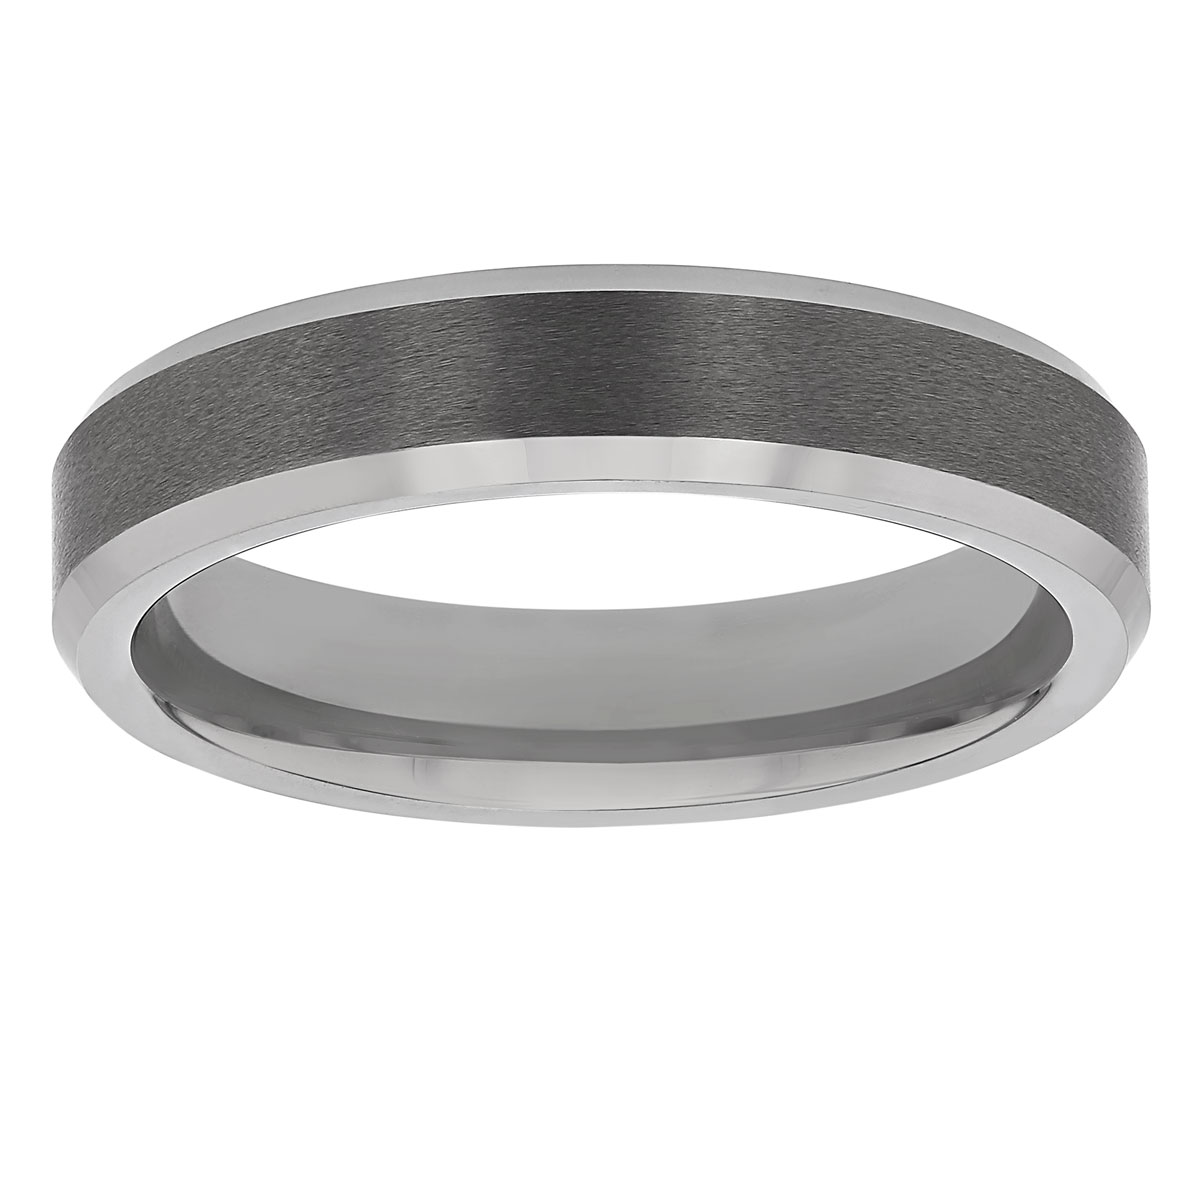 Tungsten Comfort Fit 5 mm Satin Wedding Band with Beveled Edge, Size 11 ...